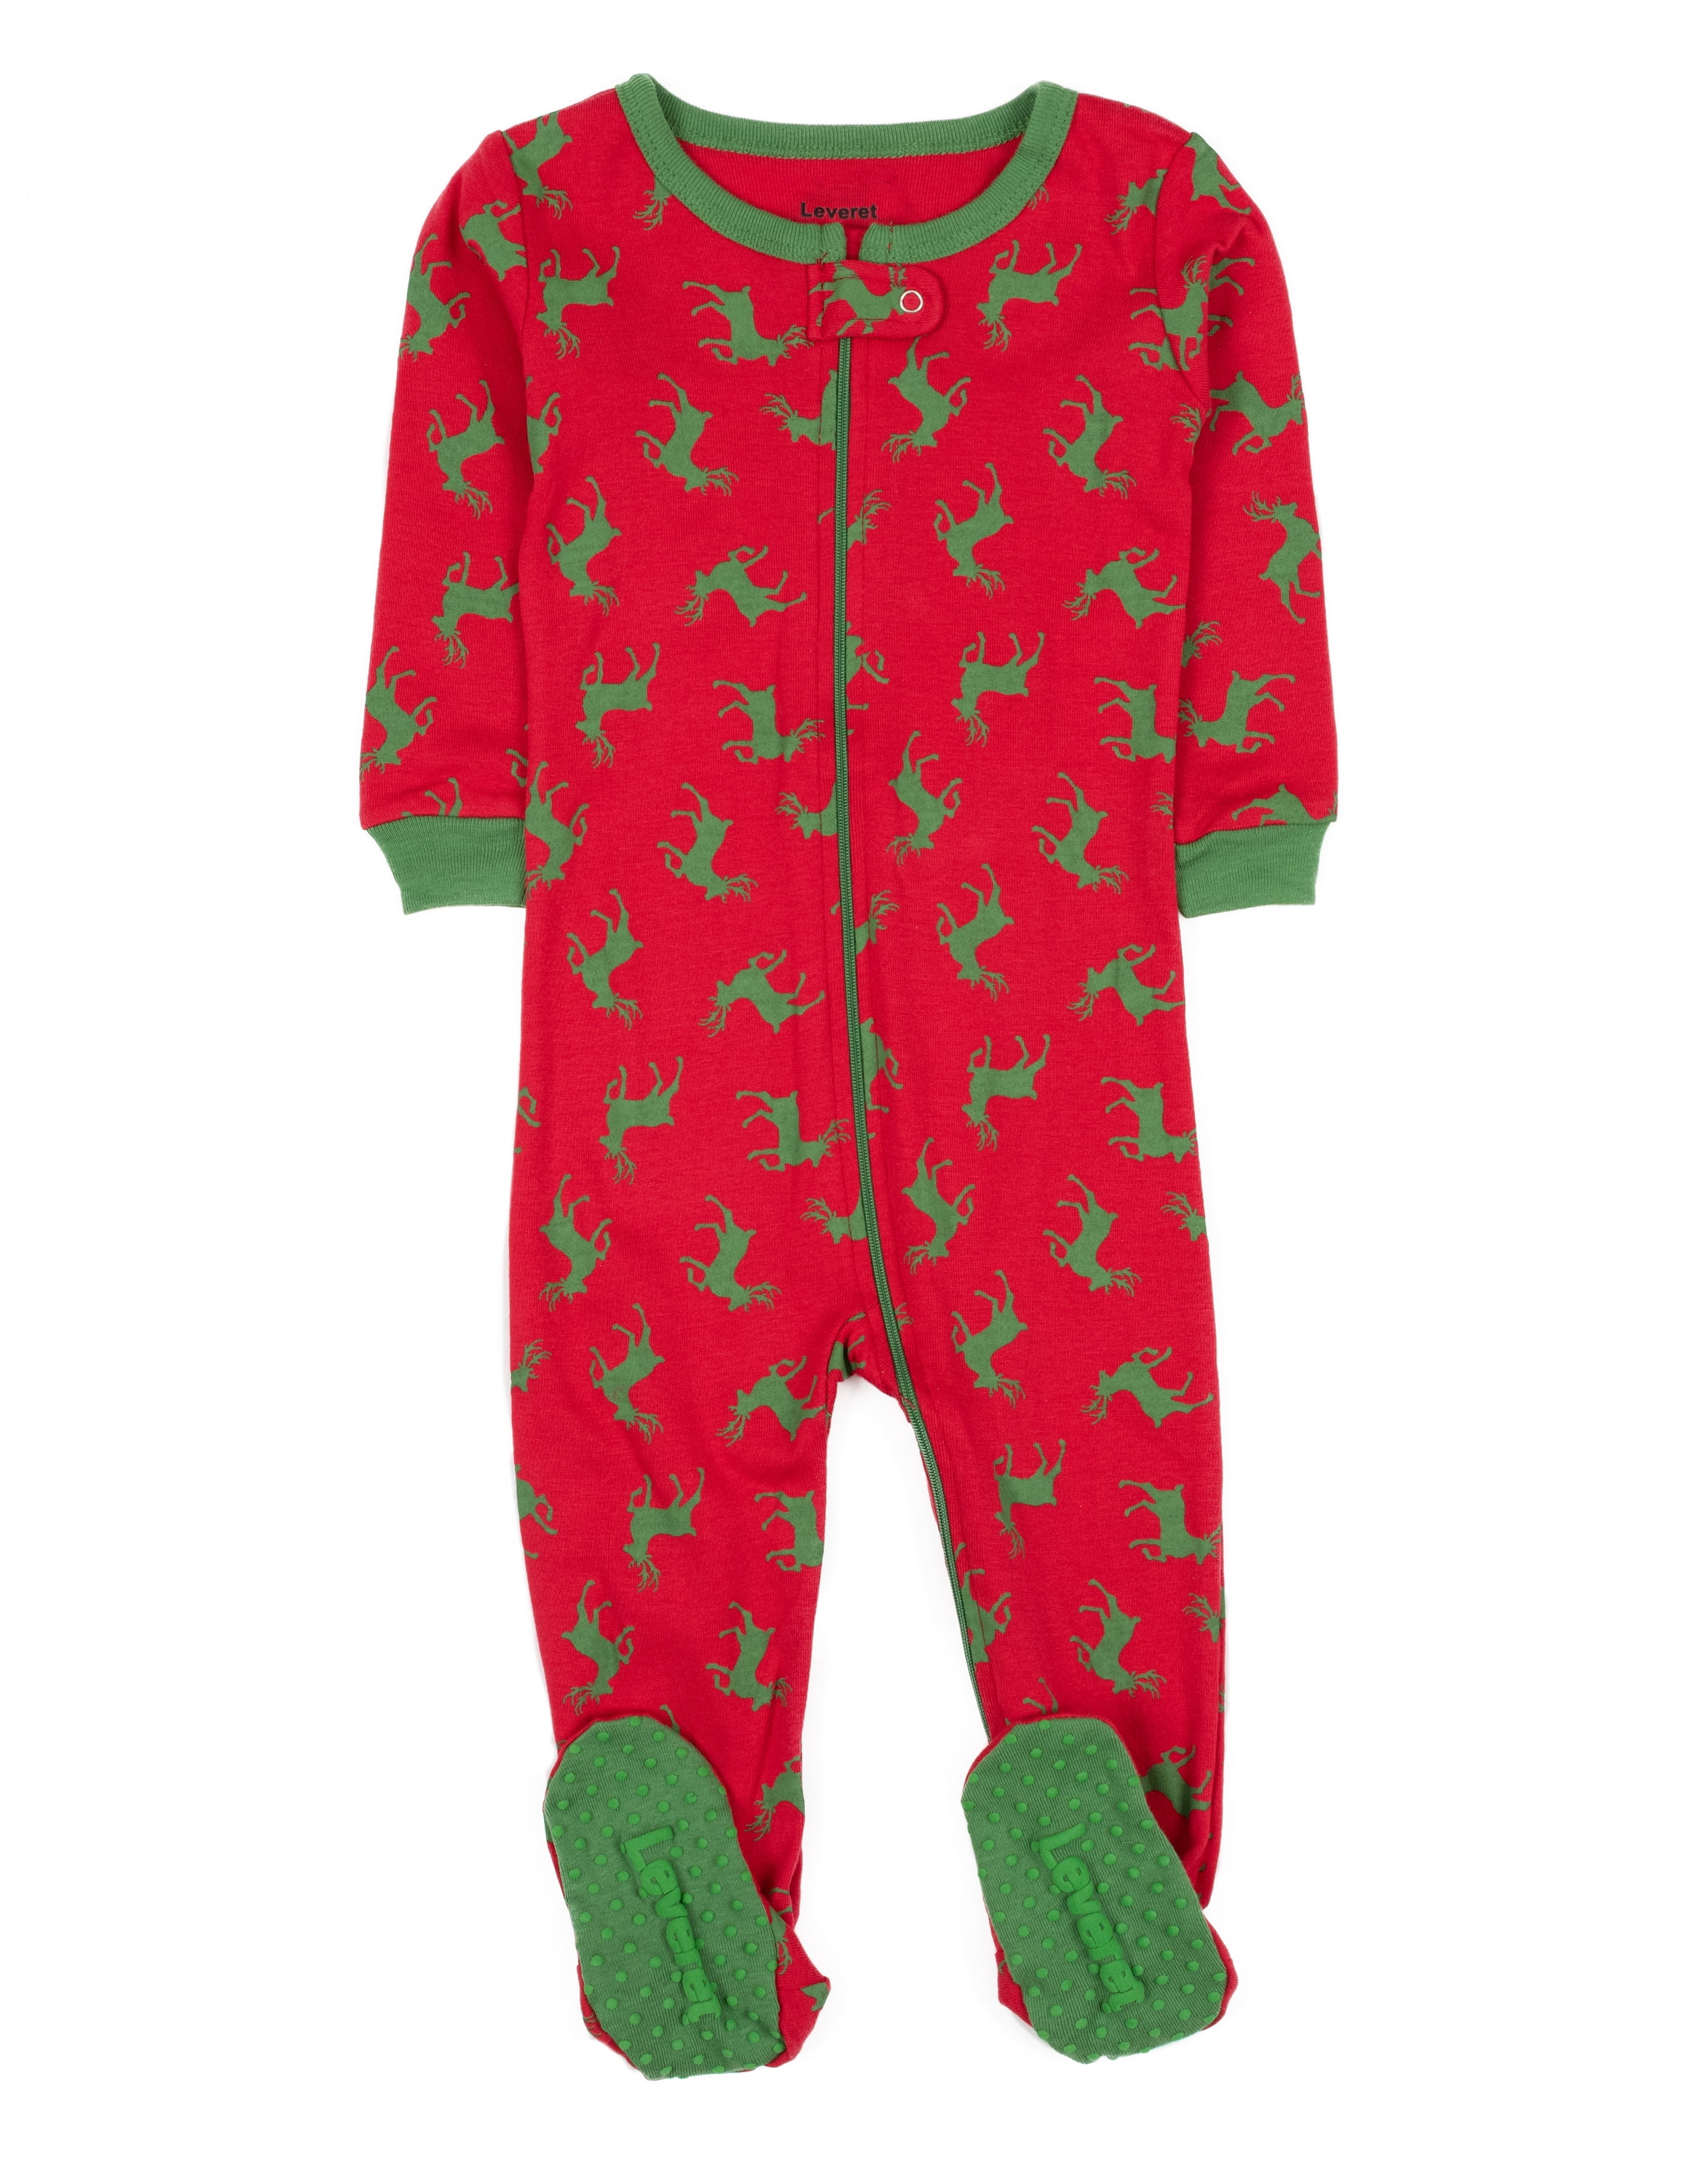 Details about   CARTER'S CHRISTMAS GIRL'S BLANKET SLEEPERS 2 PACK FOOTIE PAJAMA'S 18 MONTHS NEW 